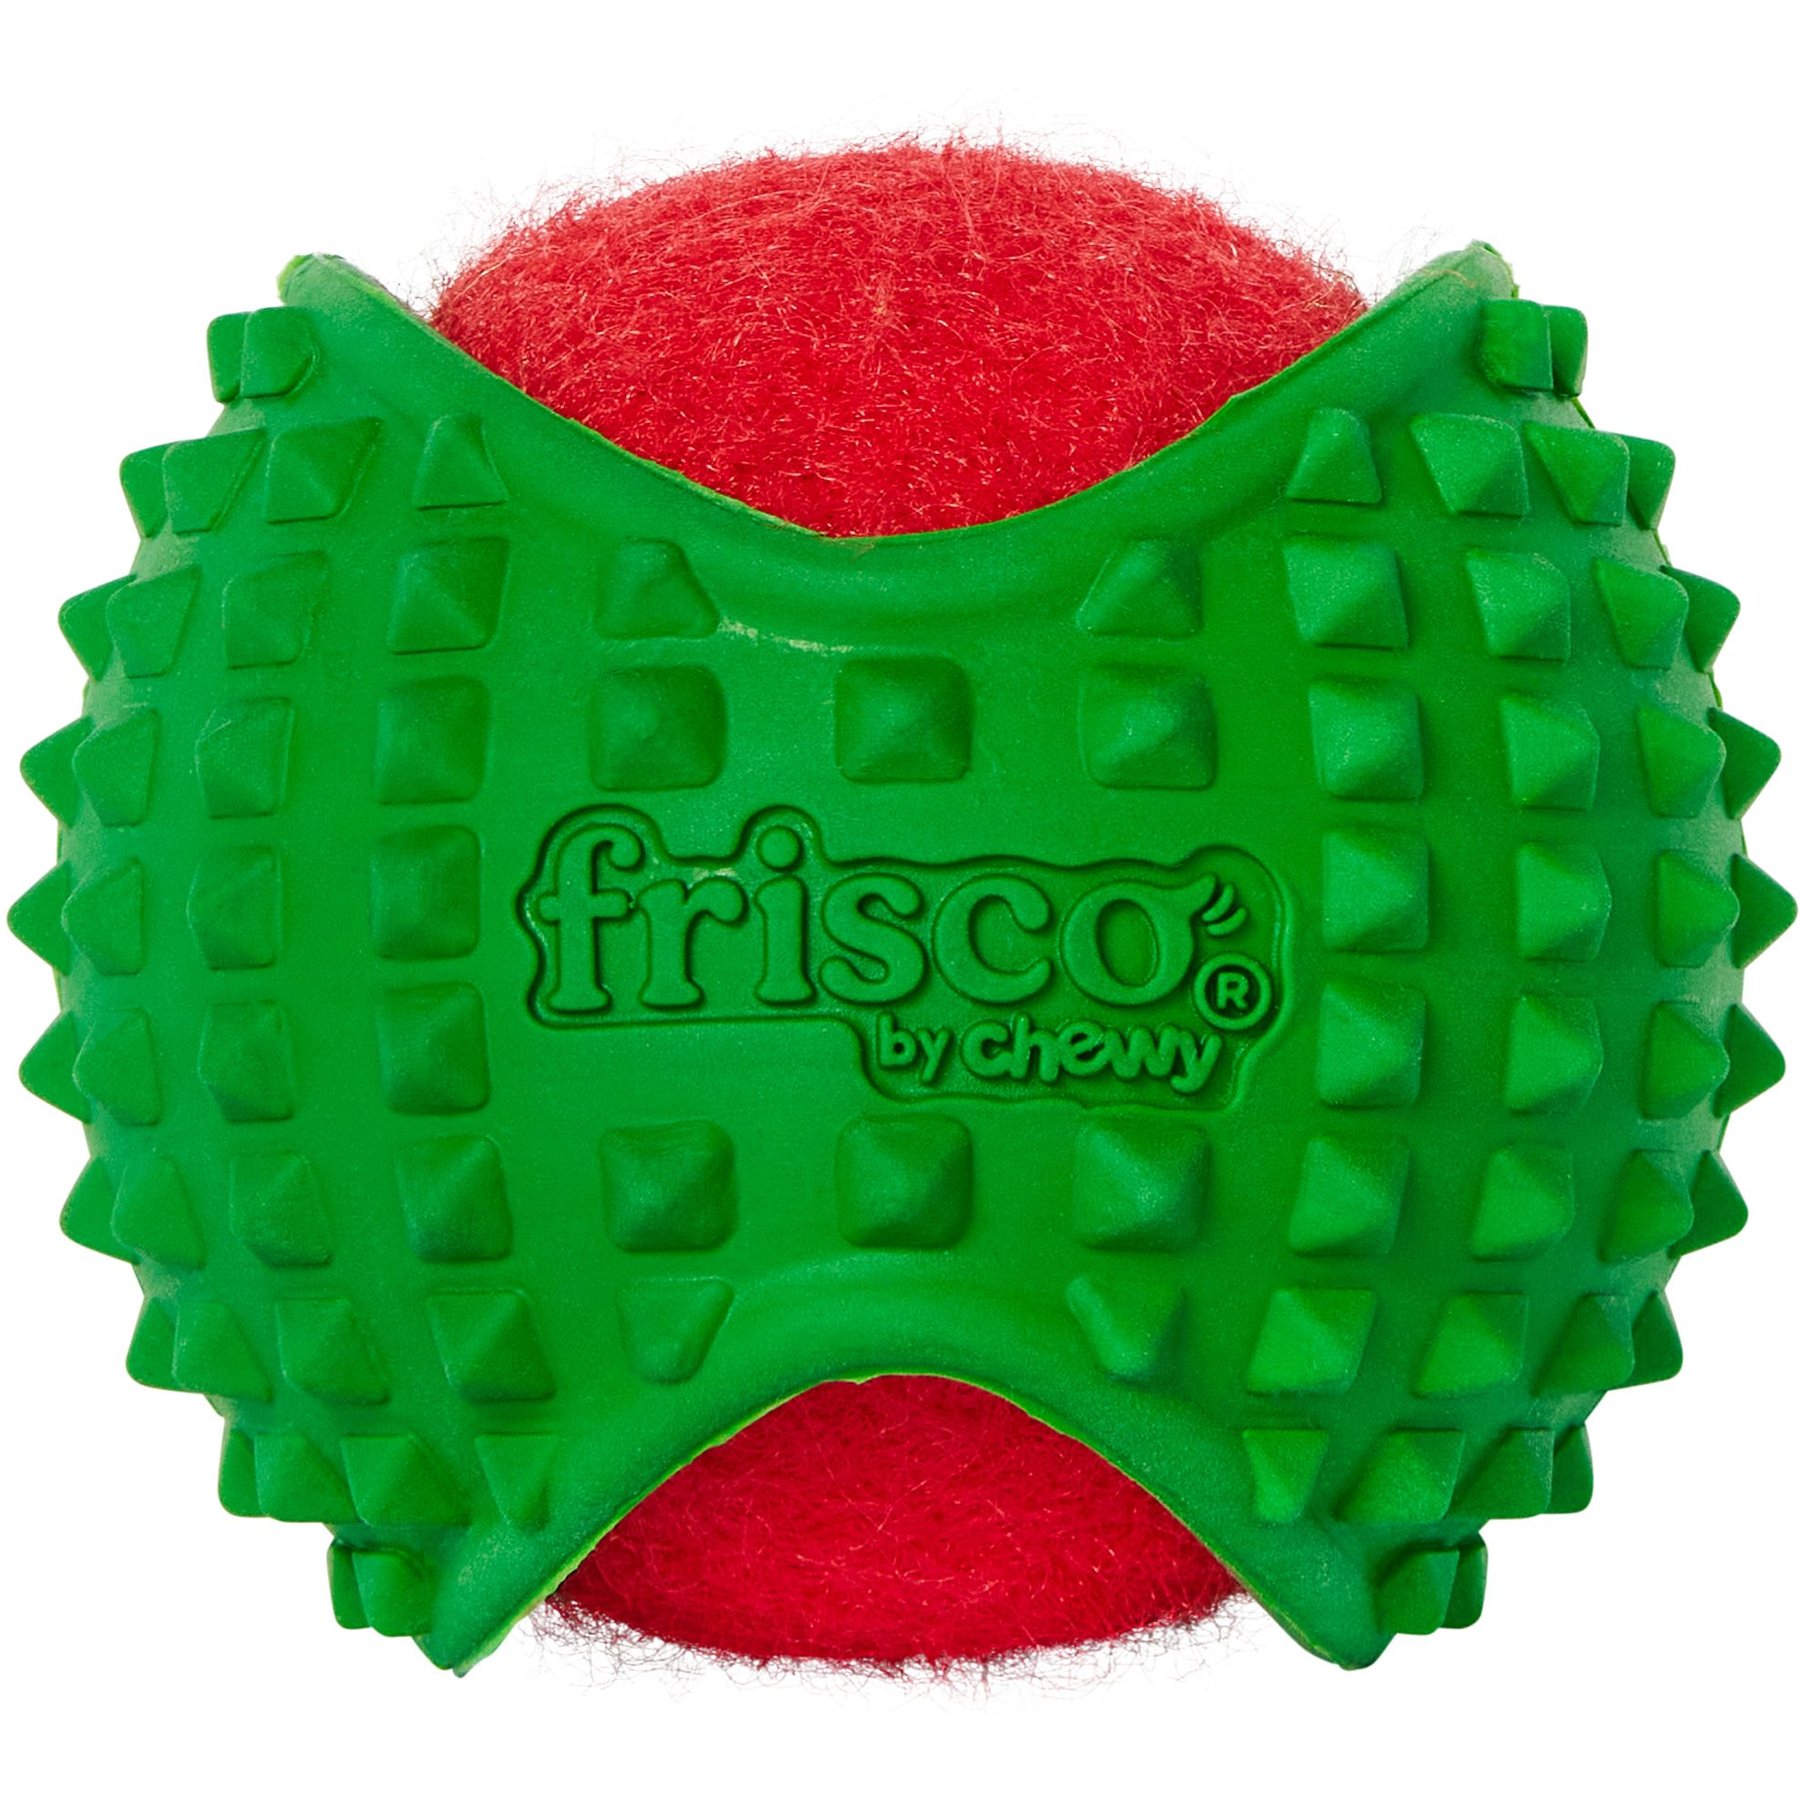 Frisco Chewy Fetch Squeaky Tennis Ball Dog Toy, 3 Count